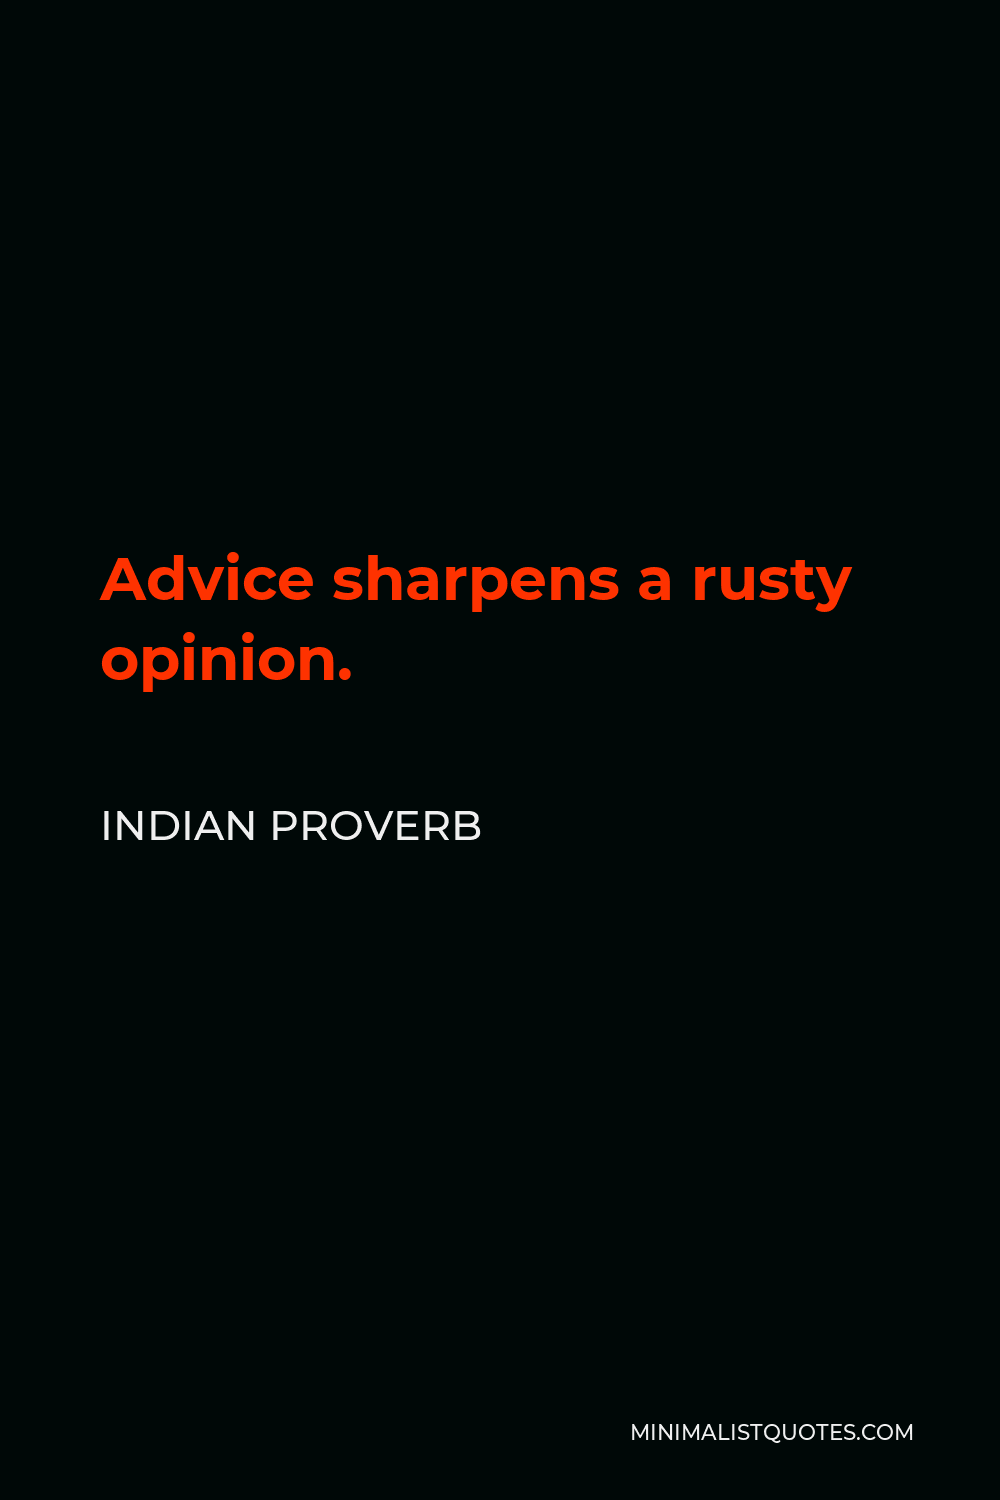 Indian Proverb Quote - Advice sharpens a rusty opinion.